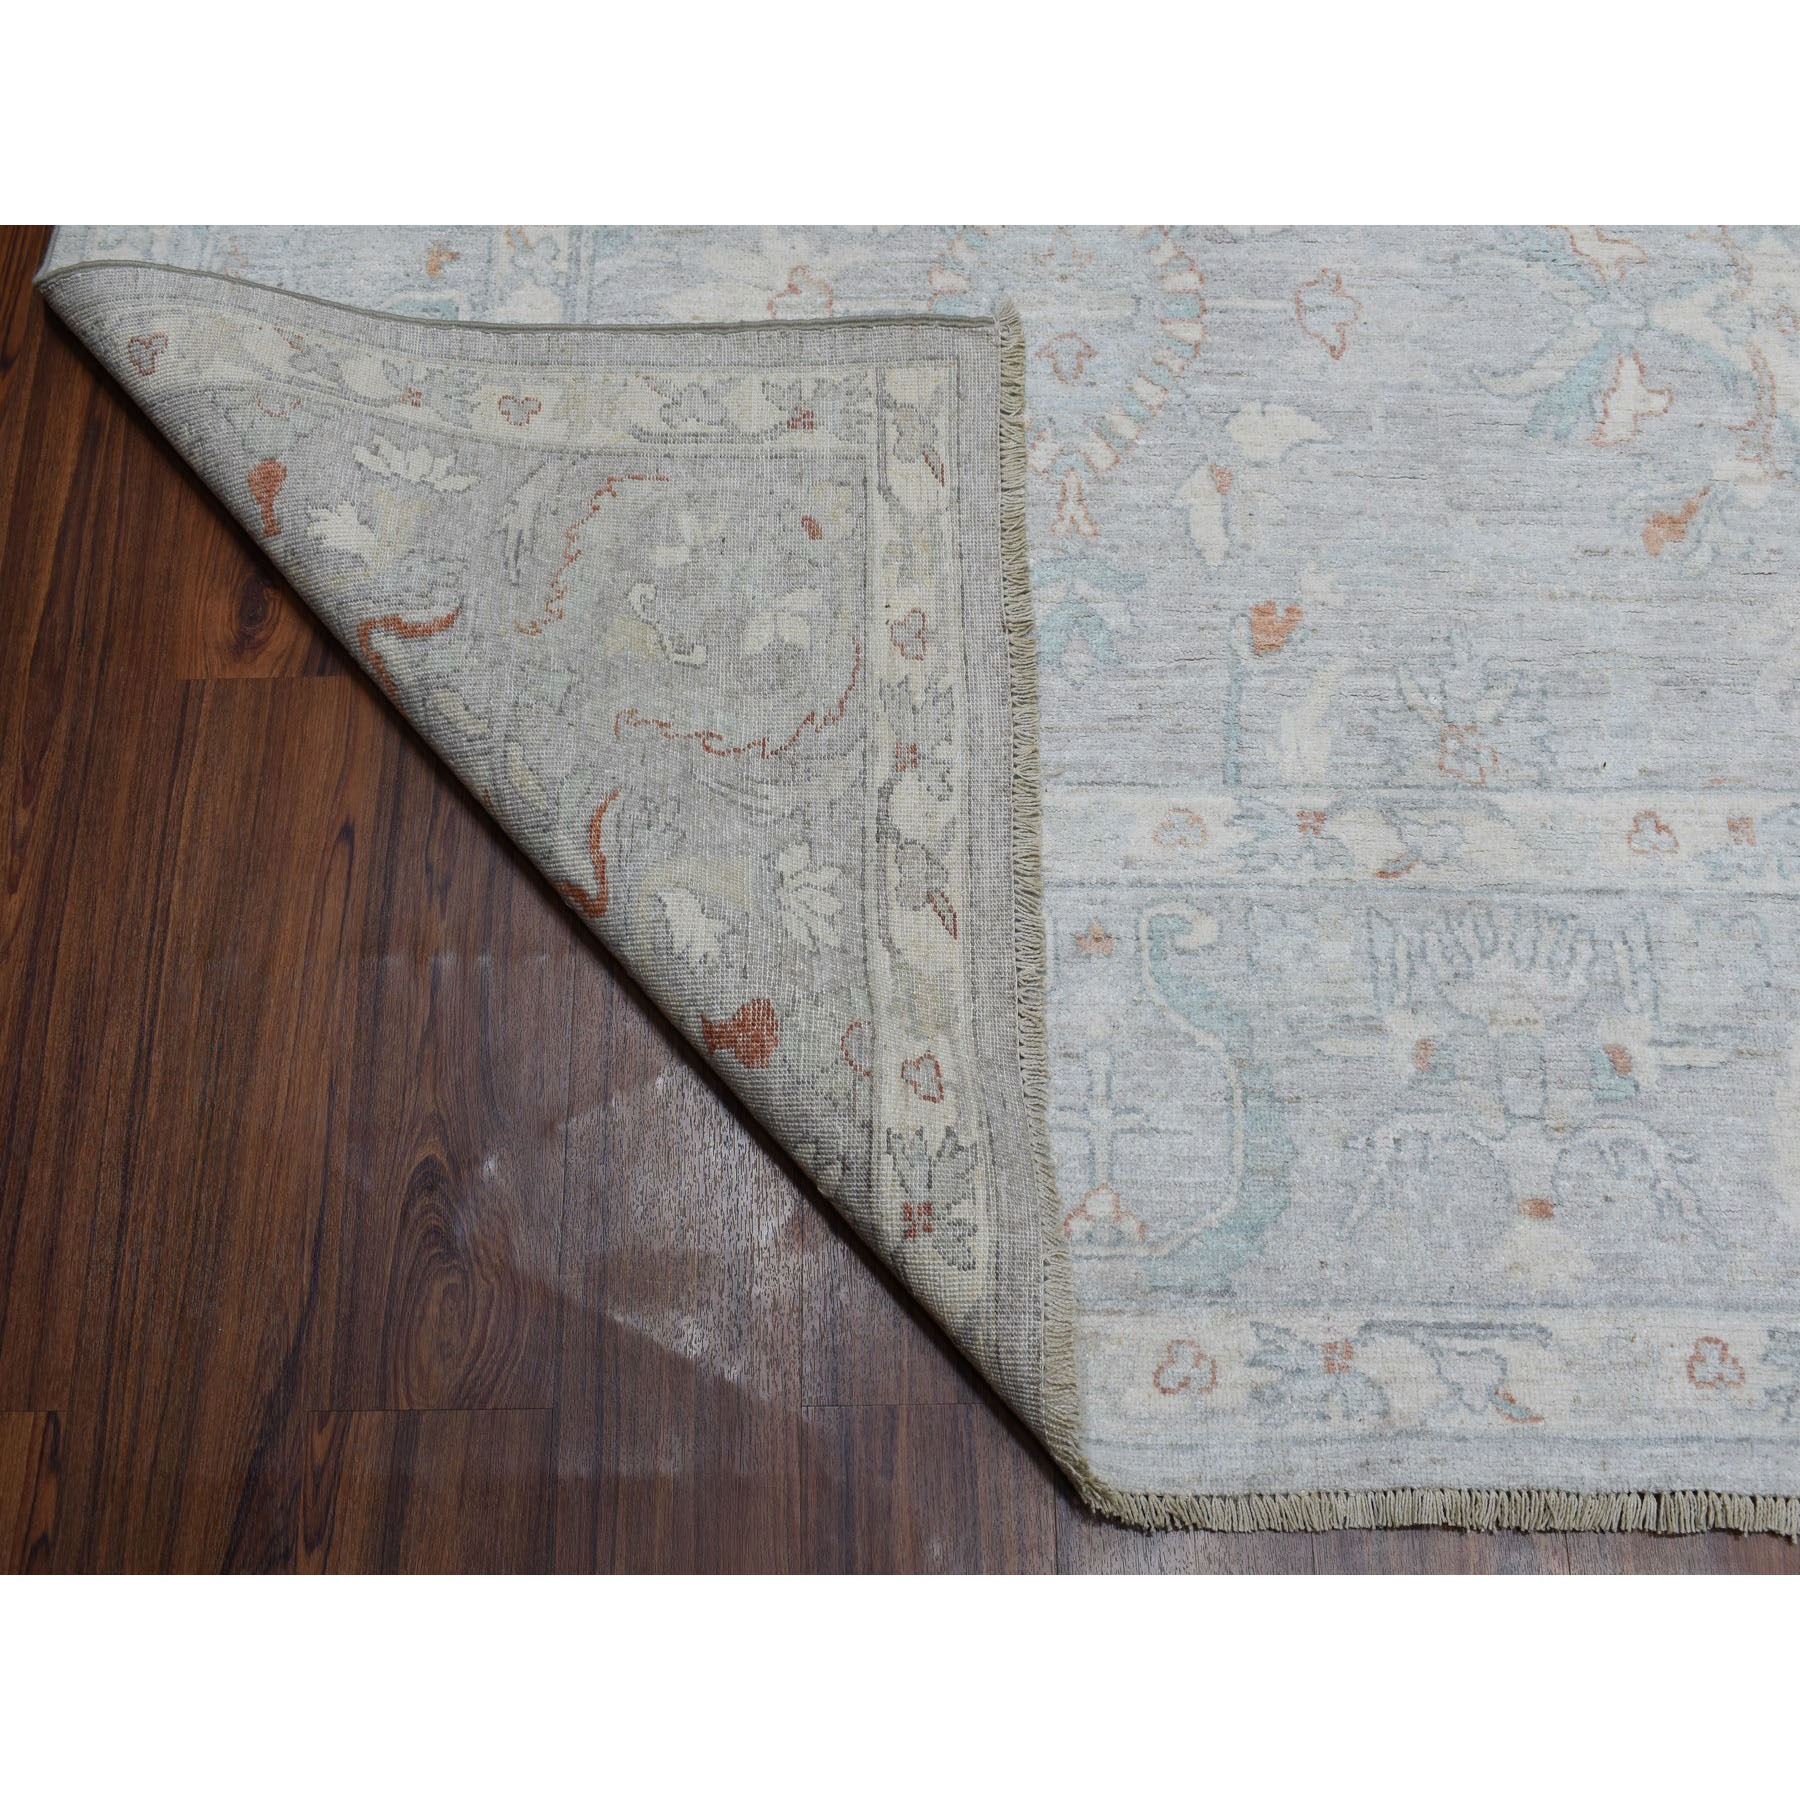 8-9 x11- White Wash Peshawar Pure Wool Hand Knotted Oriental Rug 